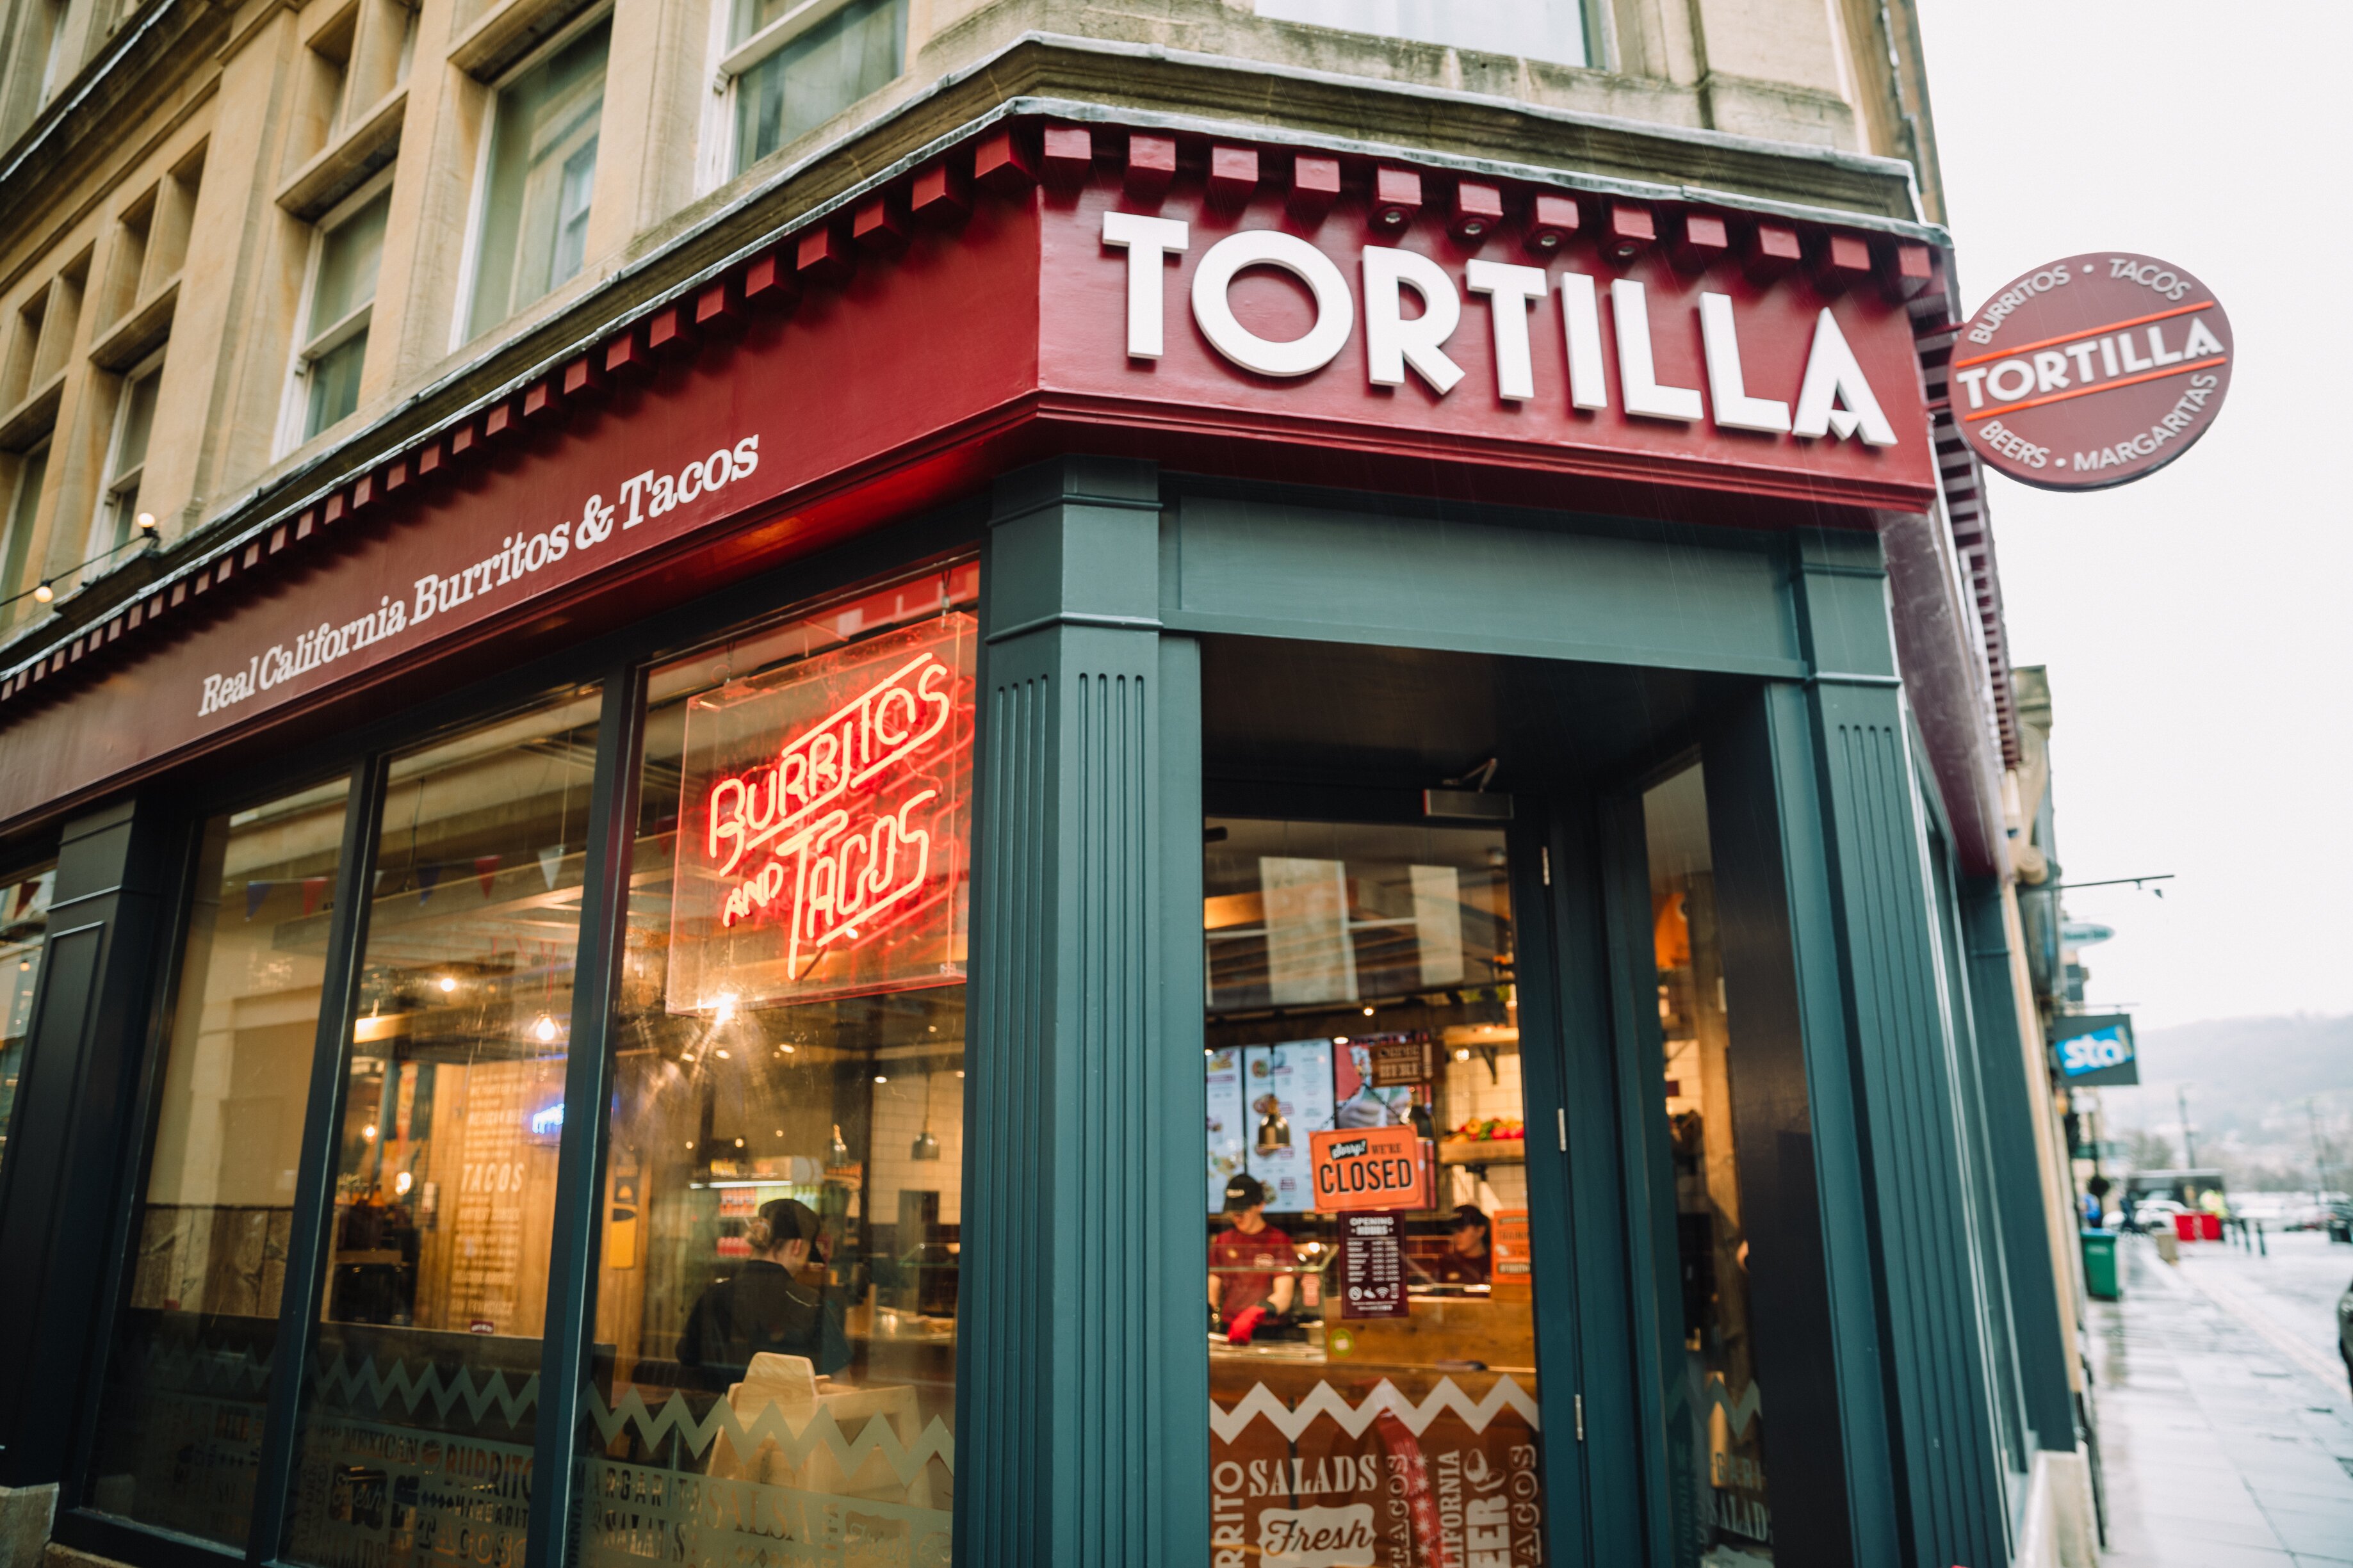 Tortilla holds off on expansion to target driving footfall